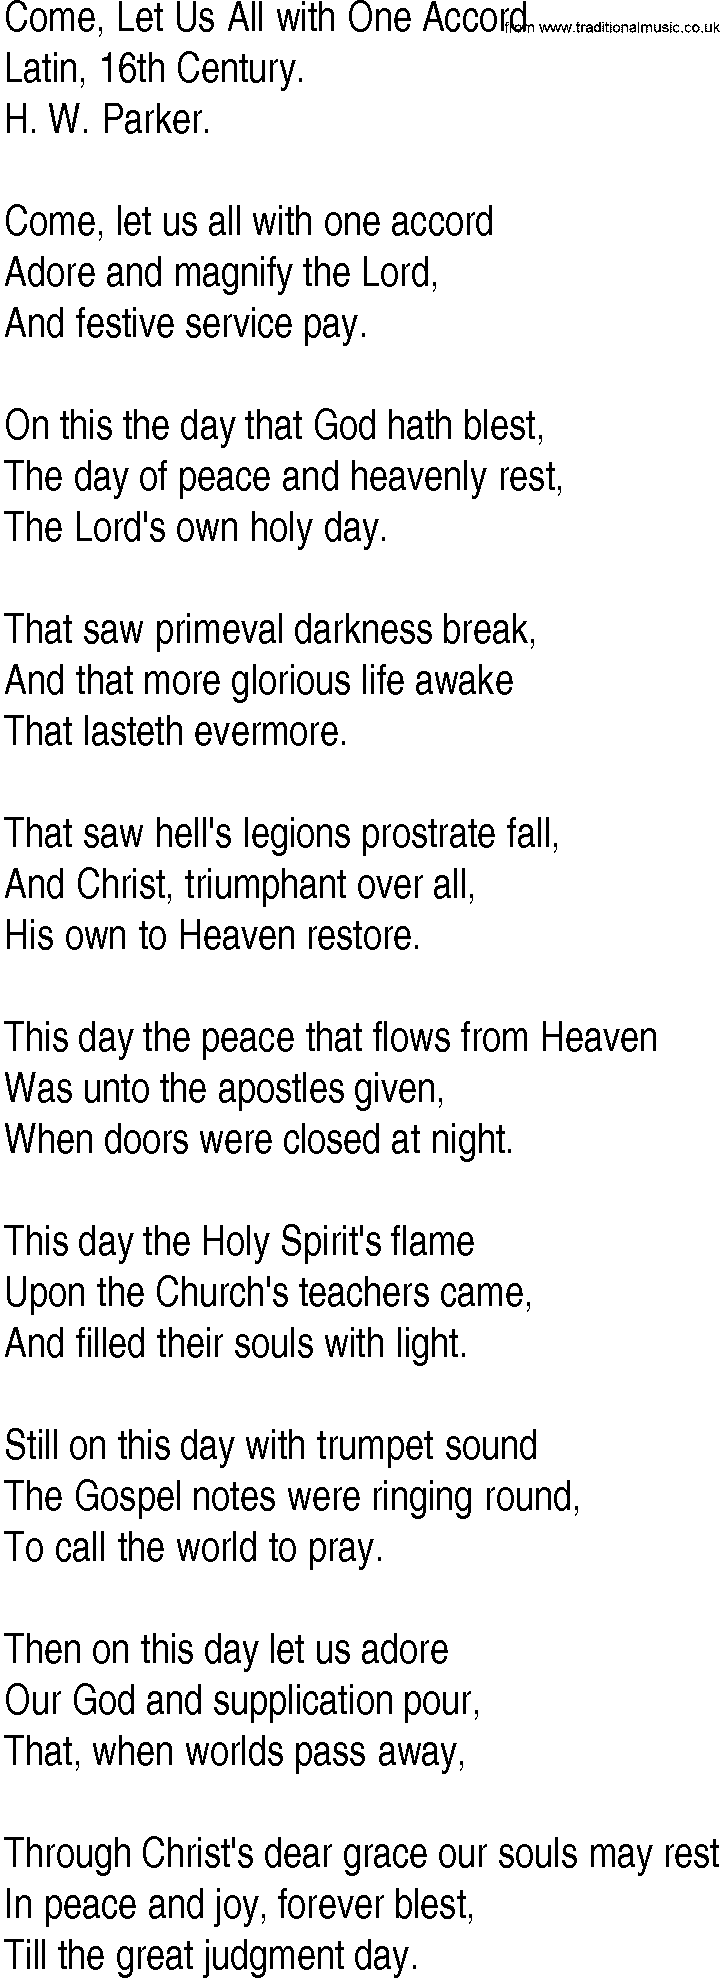 Hymn and Gospel Song: Come, Let Us All with One Accord by Latin th Century lyrics